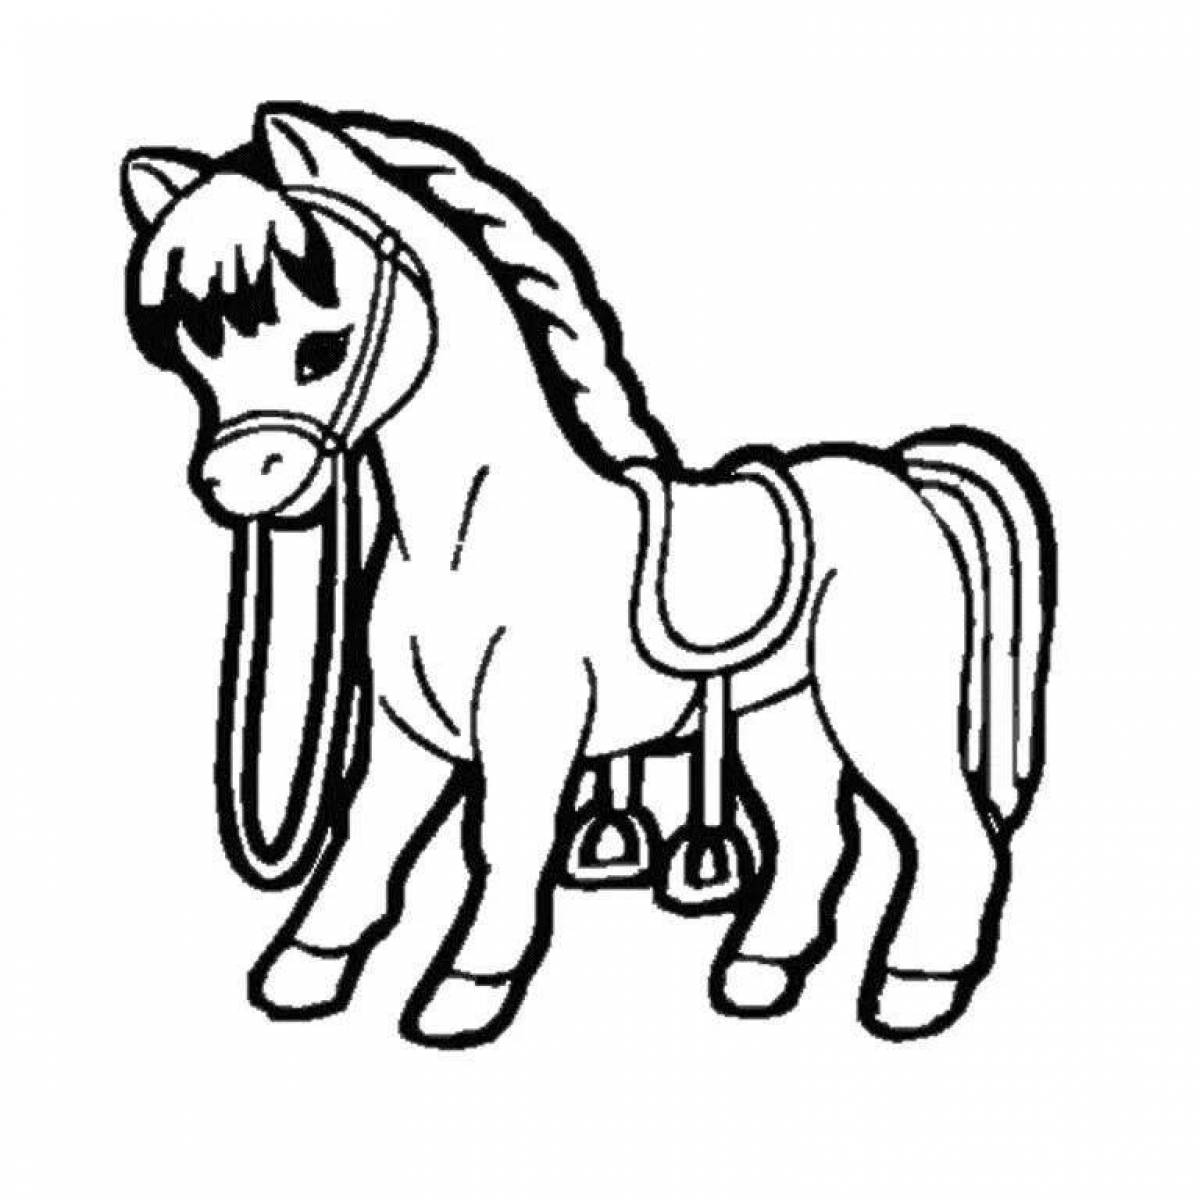 Playful white horse coloring book